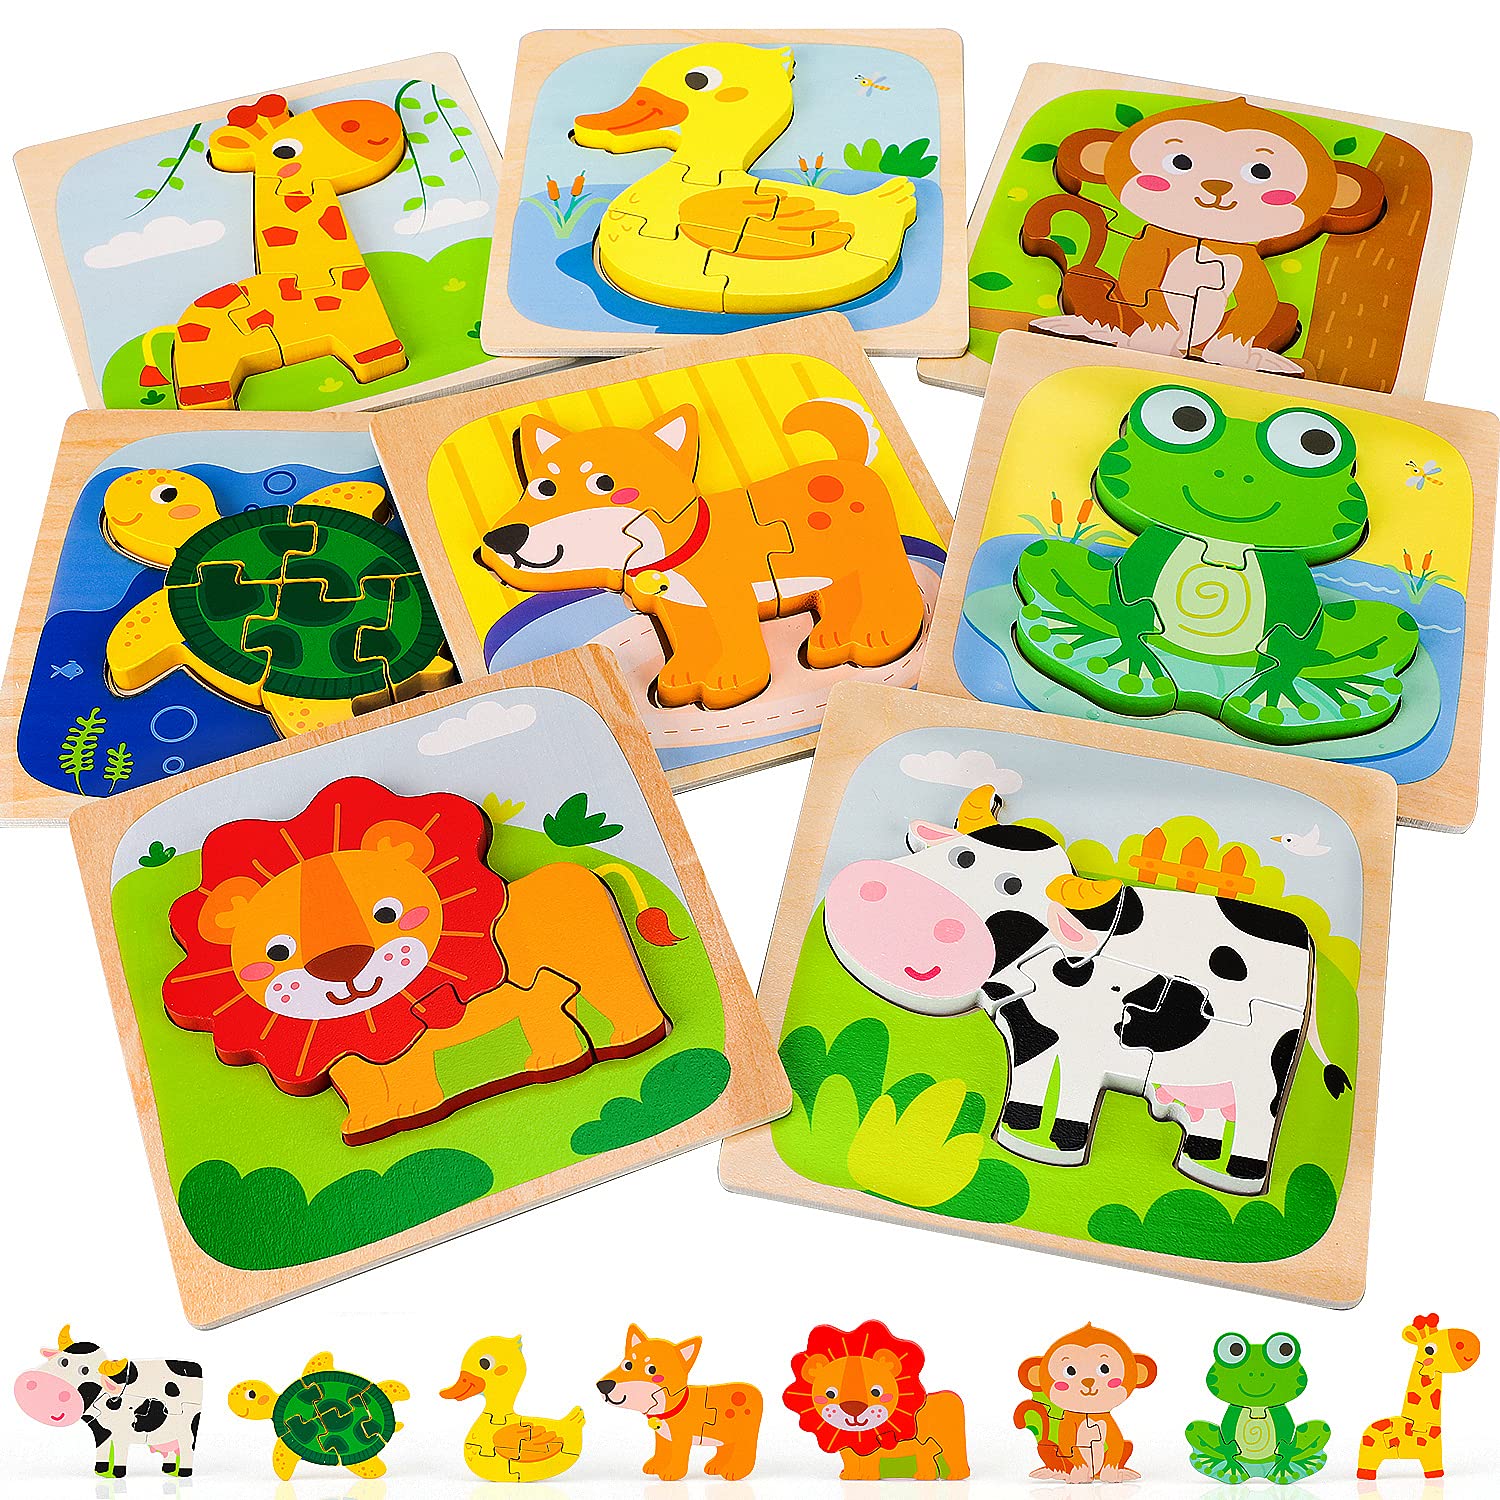 TOY Life Wooden Puzzles for Toddlers 1-3, Baby Puzzles Montessori Toy Toddler Gifts for 1 2 3 Year Old Girls Boys, 8 Animal Shape Puzzles for Kids Age 2-4, STEM Educational Learning Toy for Toddler